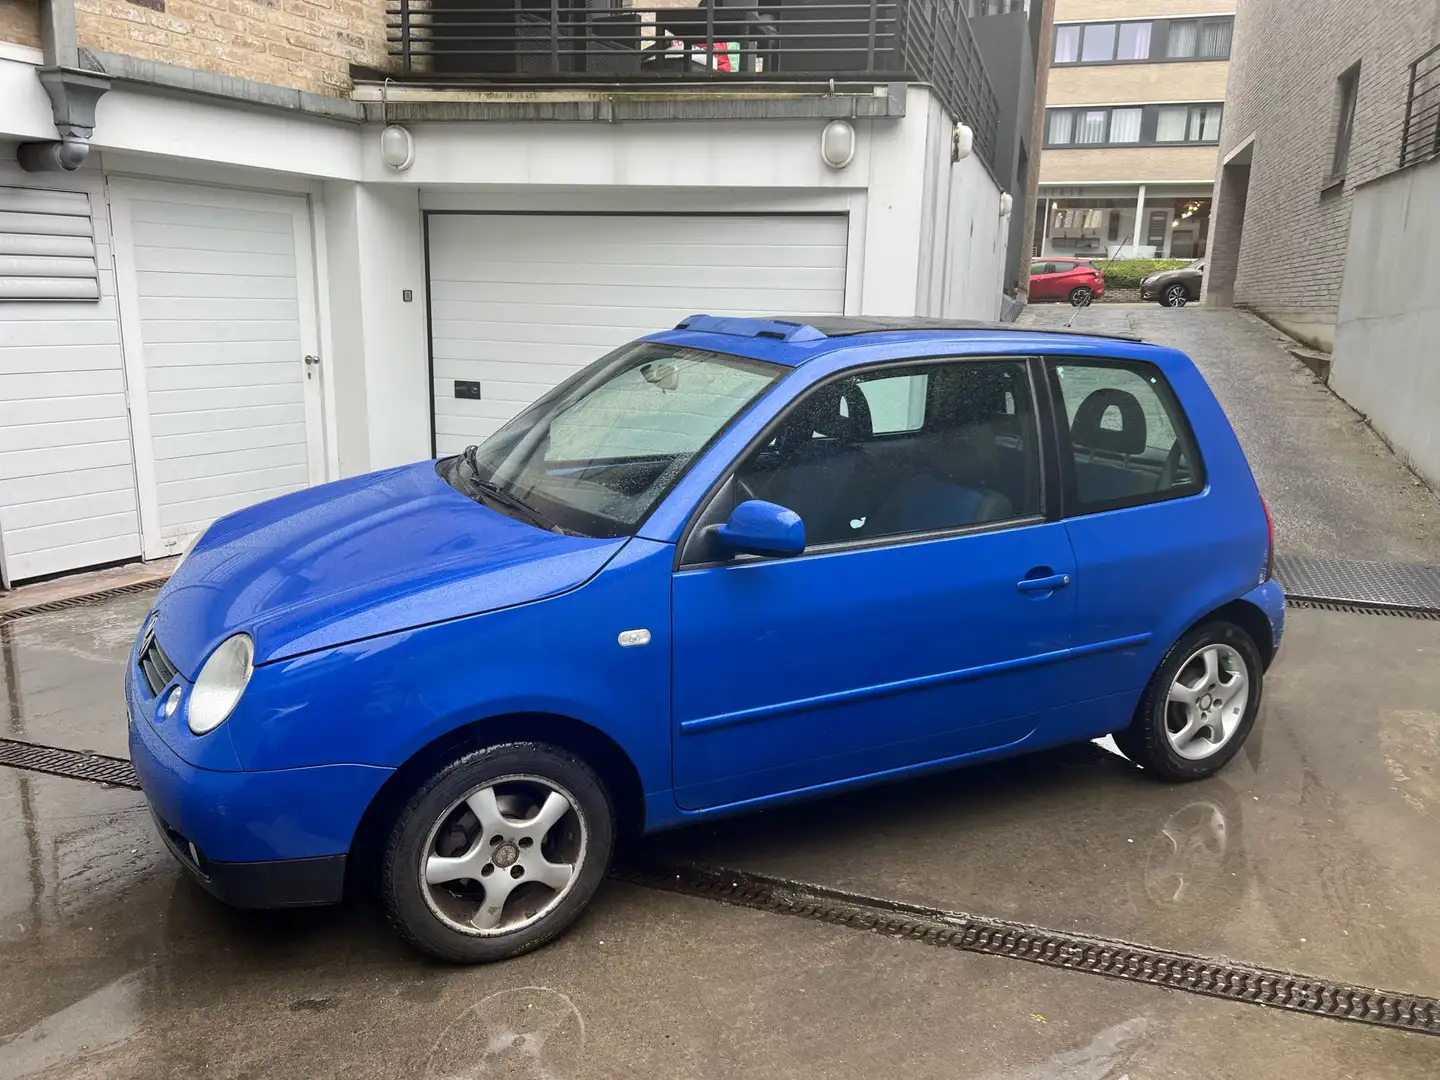 Volkswagen Lupo 1.4i Open Air //automatique//Roule top// Azul - 2